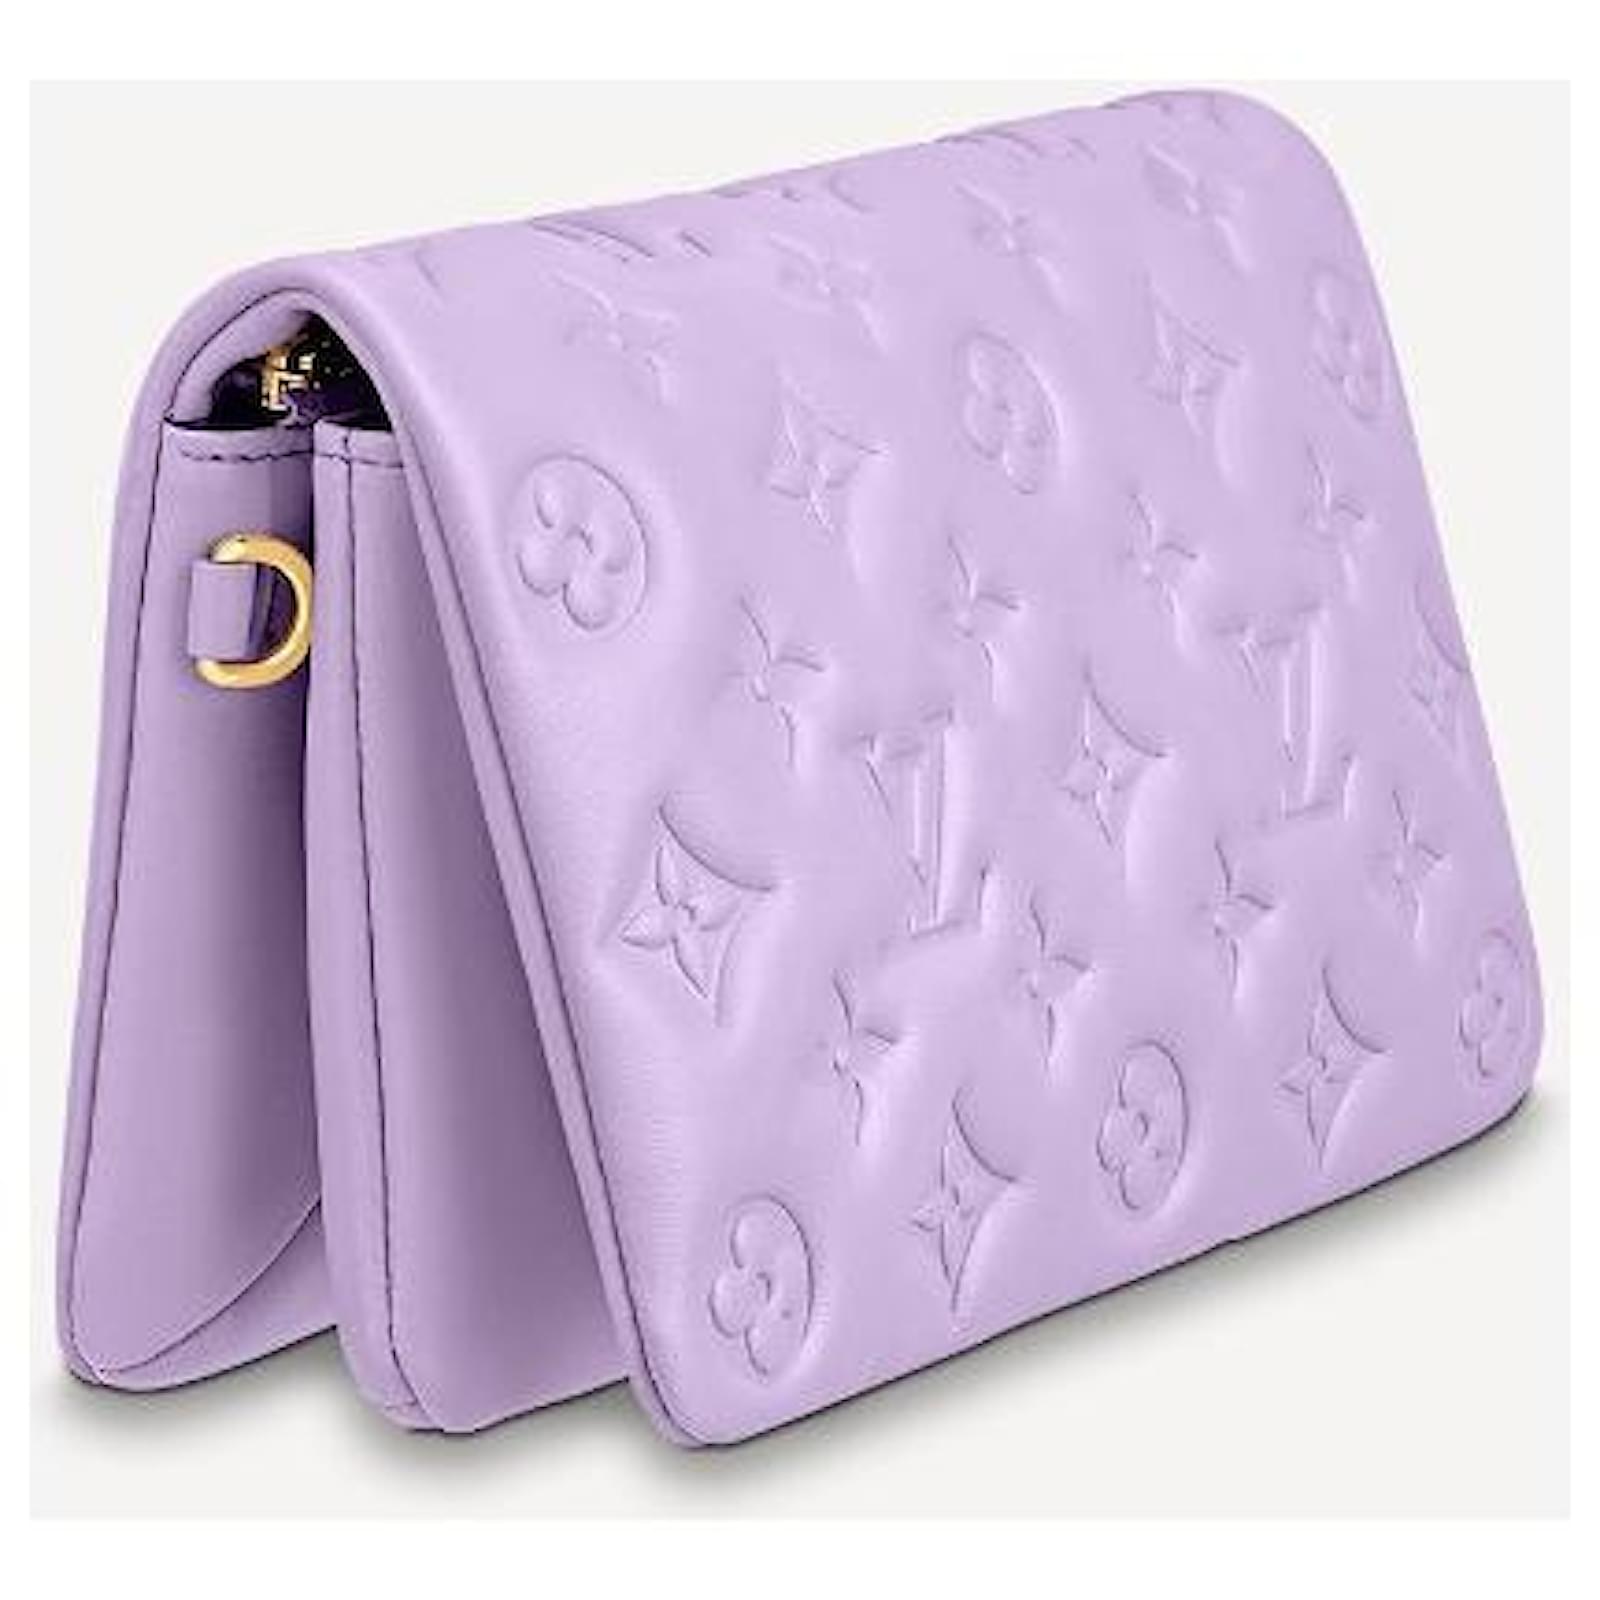 Louis Vuitton Coussin BB, Orchid Purple, New in Box WA001